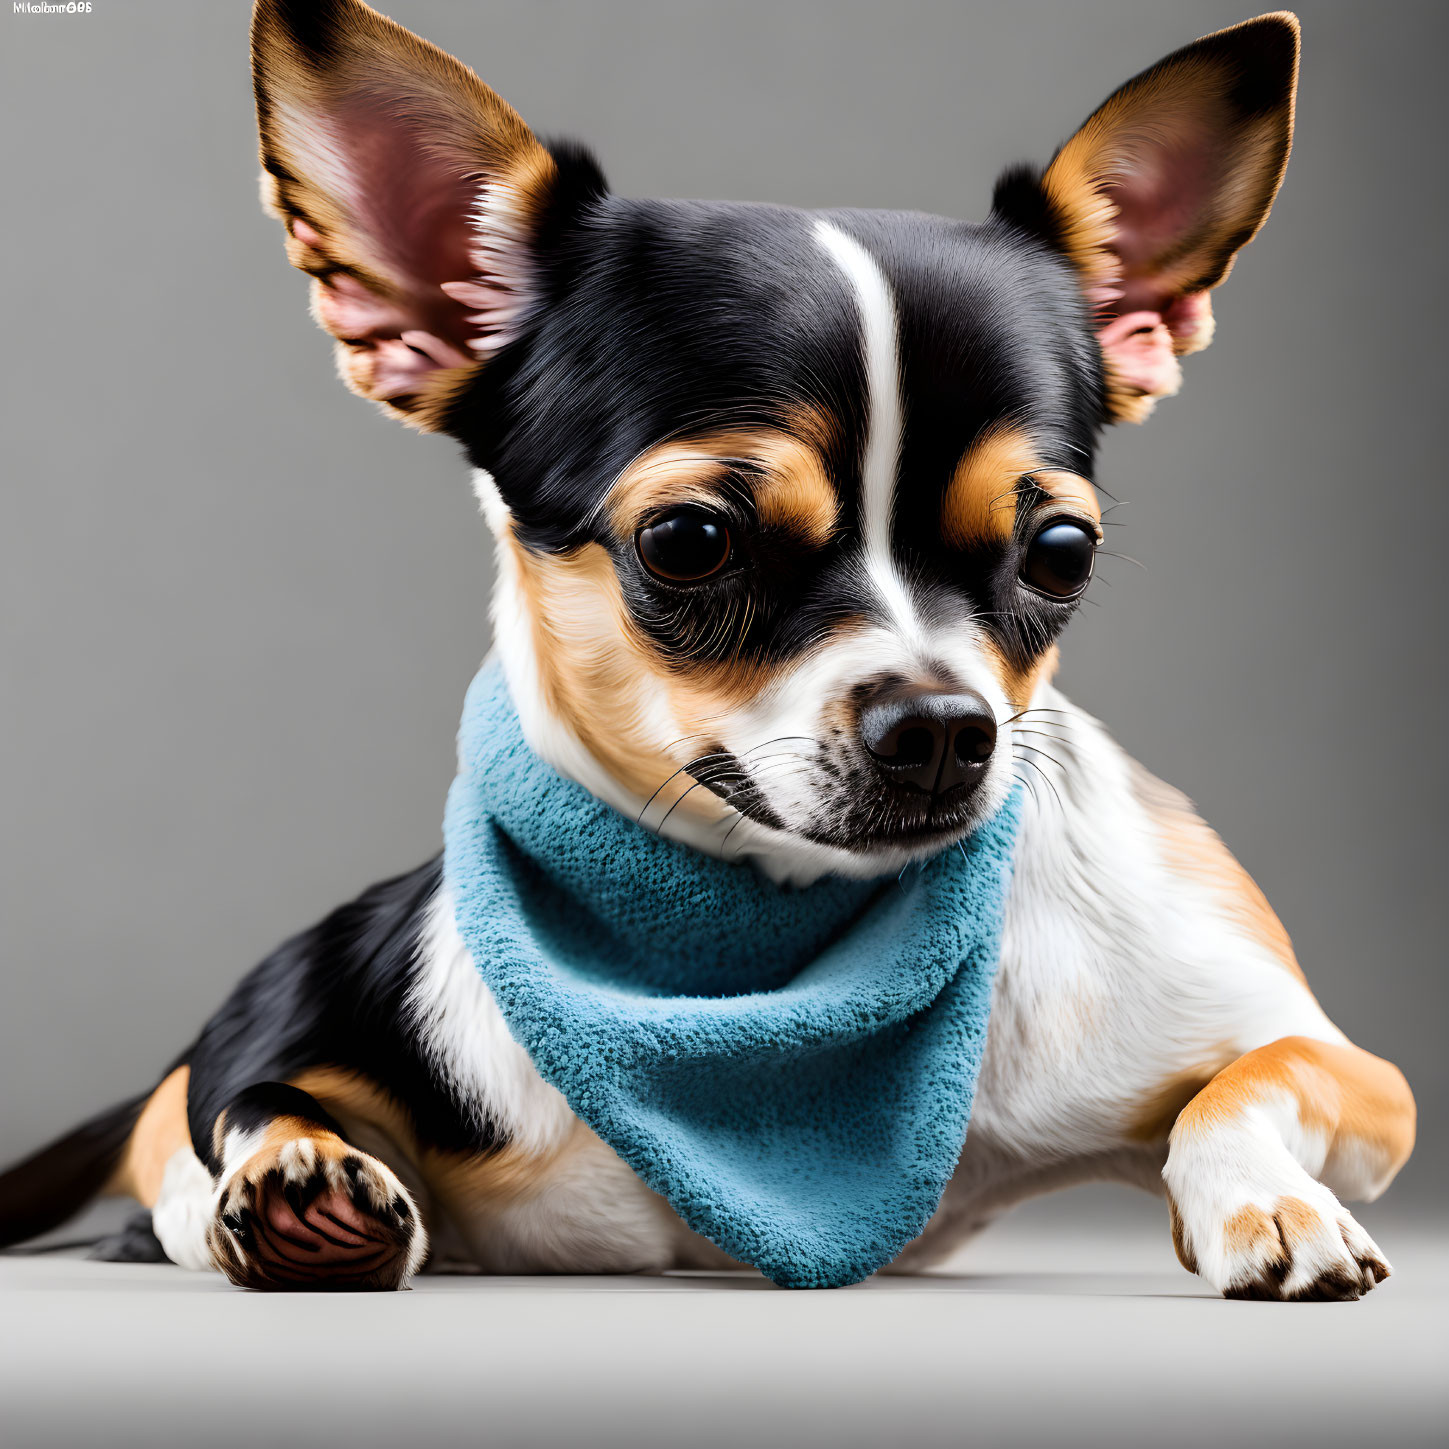 Small Chihuahua with Large Ears and Blue Scarf Resting and Curious